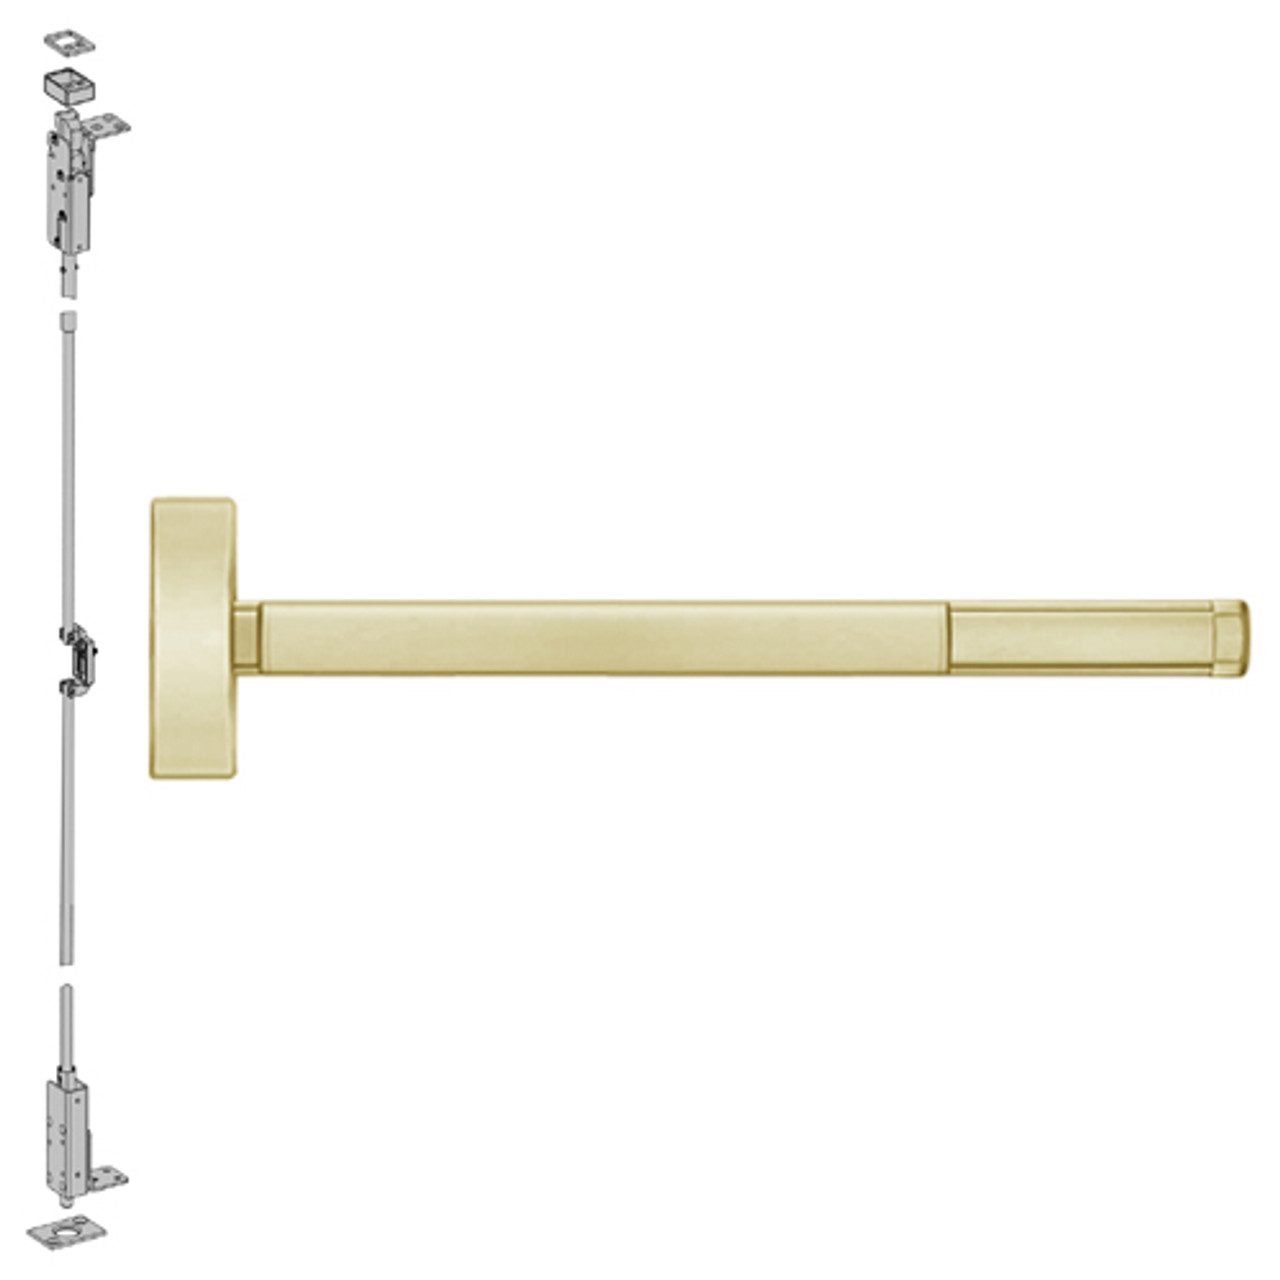 FL2703-606-48 PHI 2700 Series Fire Rated Wood Door Concealed Vertical Exit Device Prepped for Key Retracts Latchbolt in Satin Brass Finish